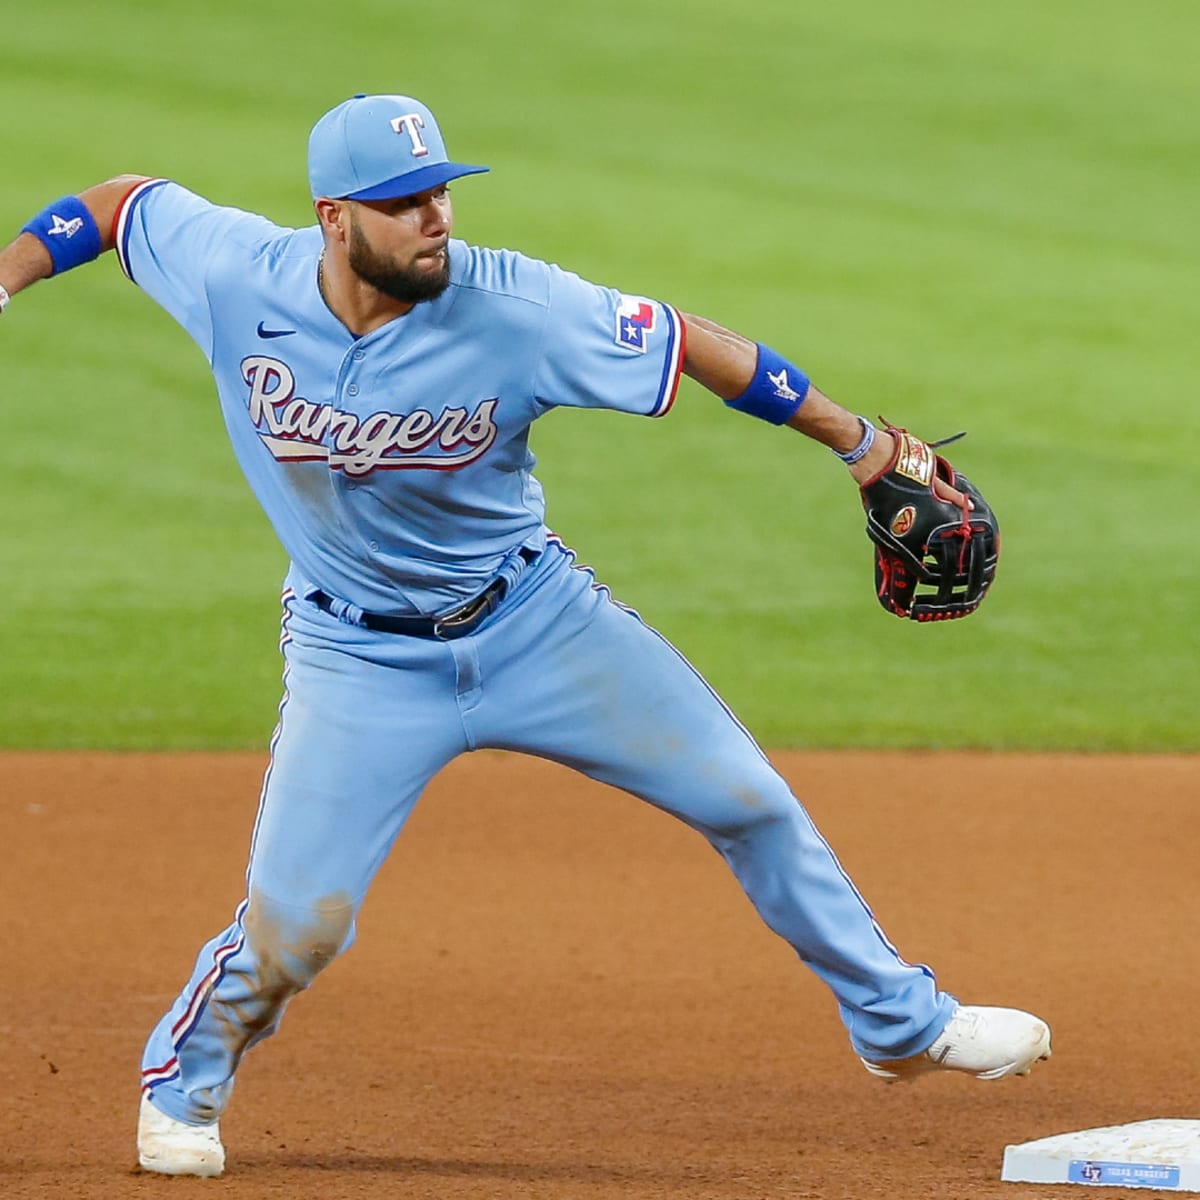 Isiah Kiner-Falefa Thanks Texas Rangers and Their Fans After Trade